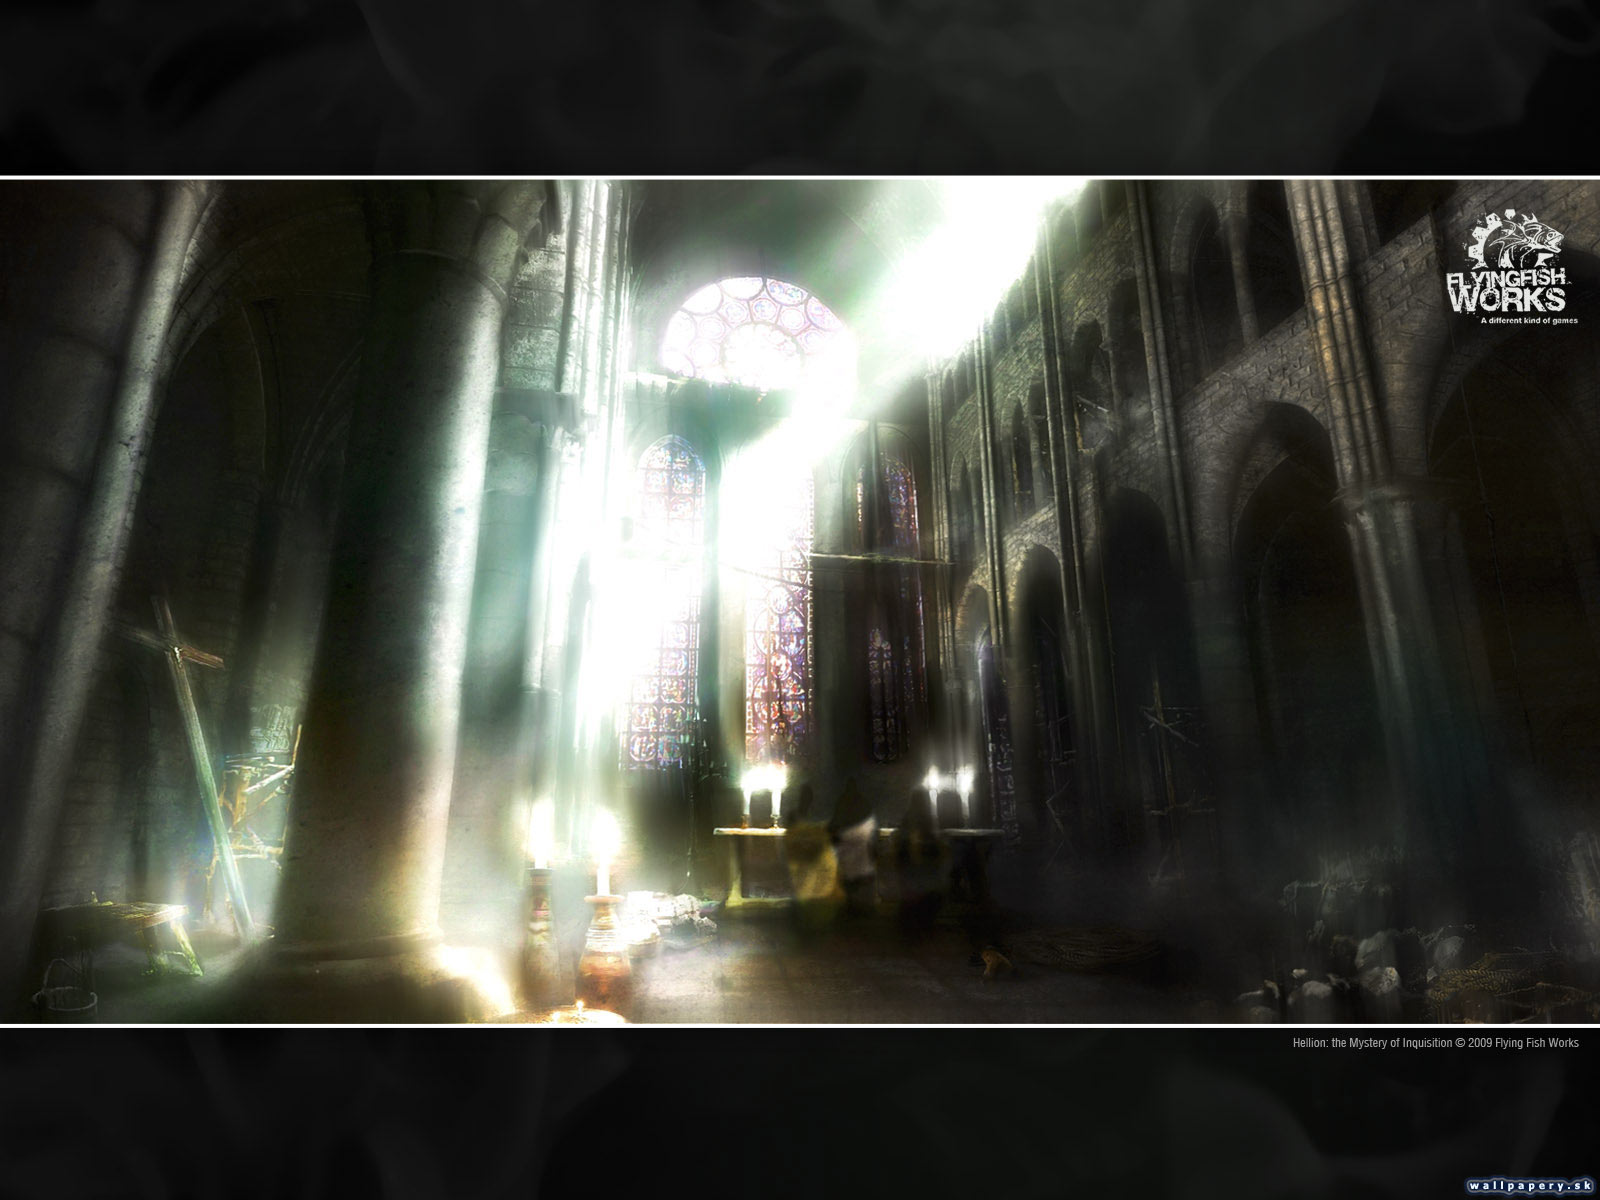 Hellion: Mystery of the Inquisition - wallpaper 4